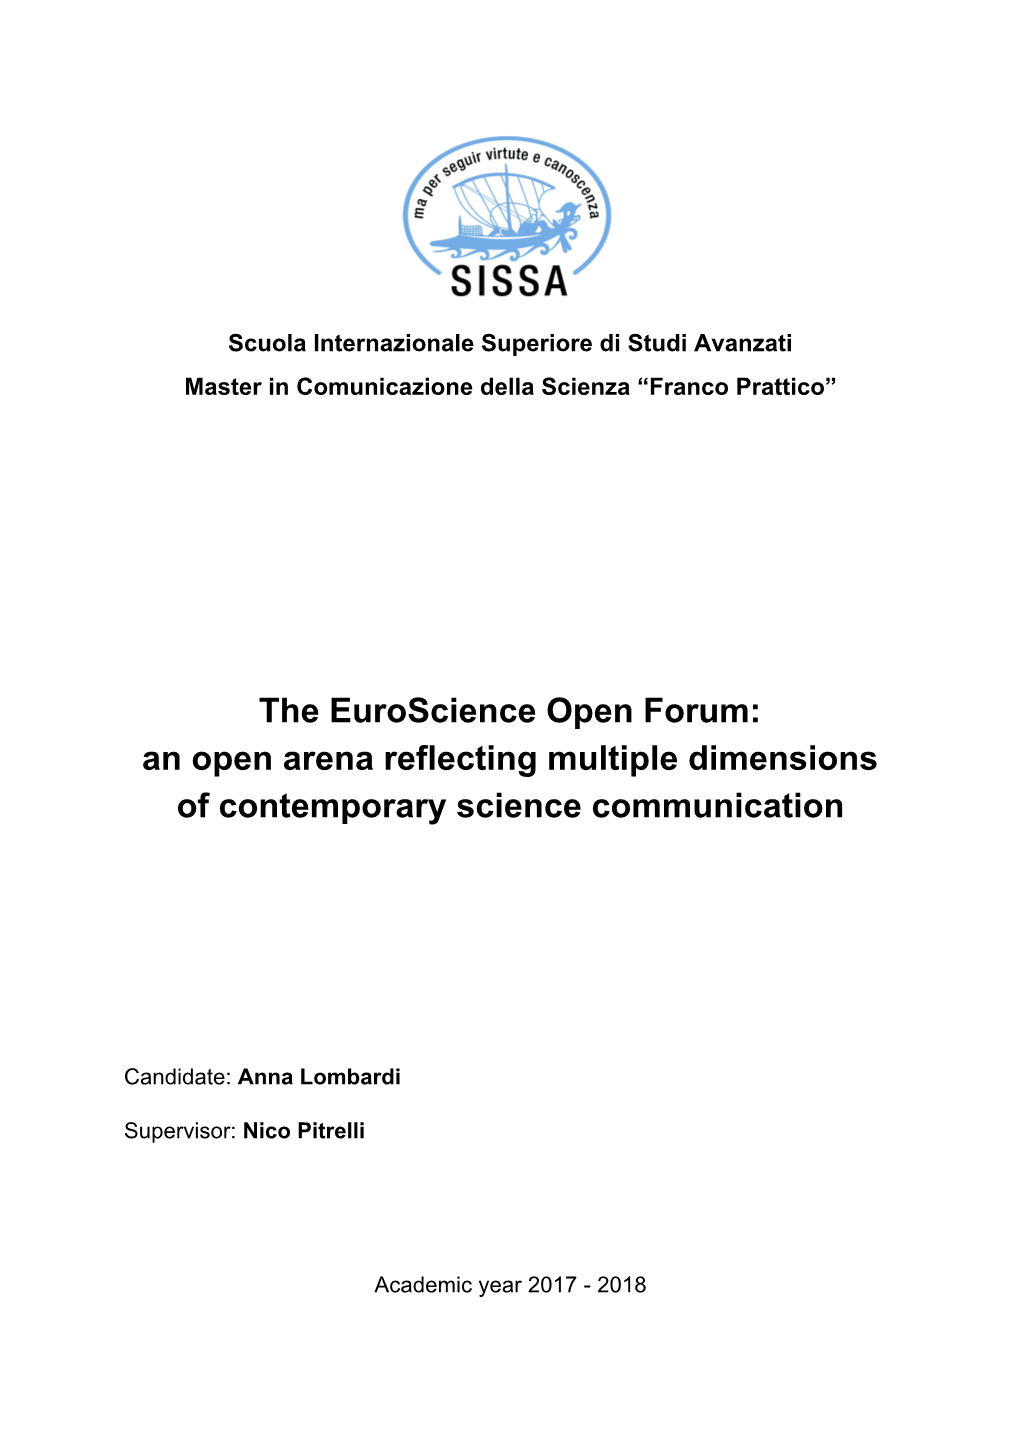 The Euroscience Open Forum: an Open Arena Reflecting Multiple Dimensions of Contemporary Science Communication